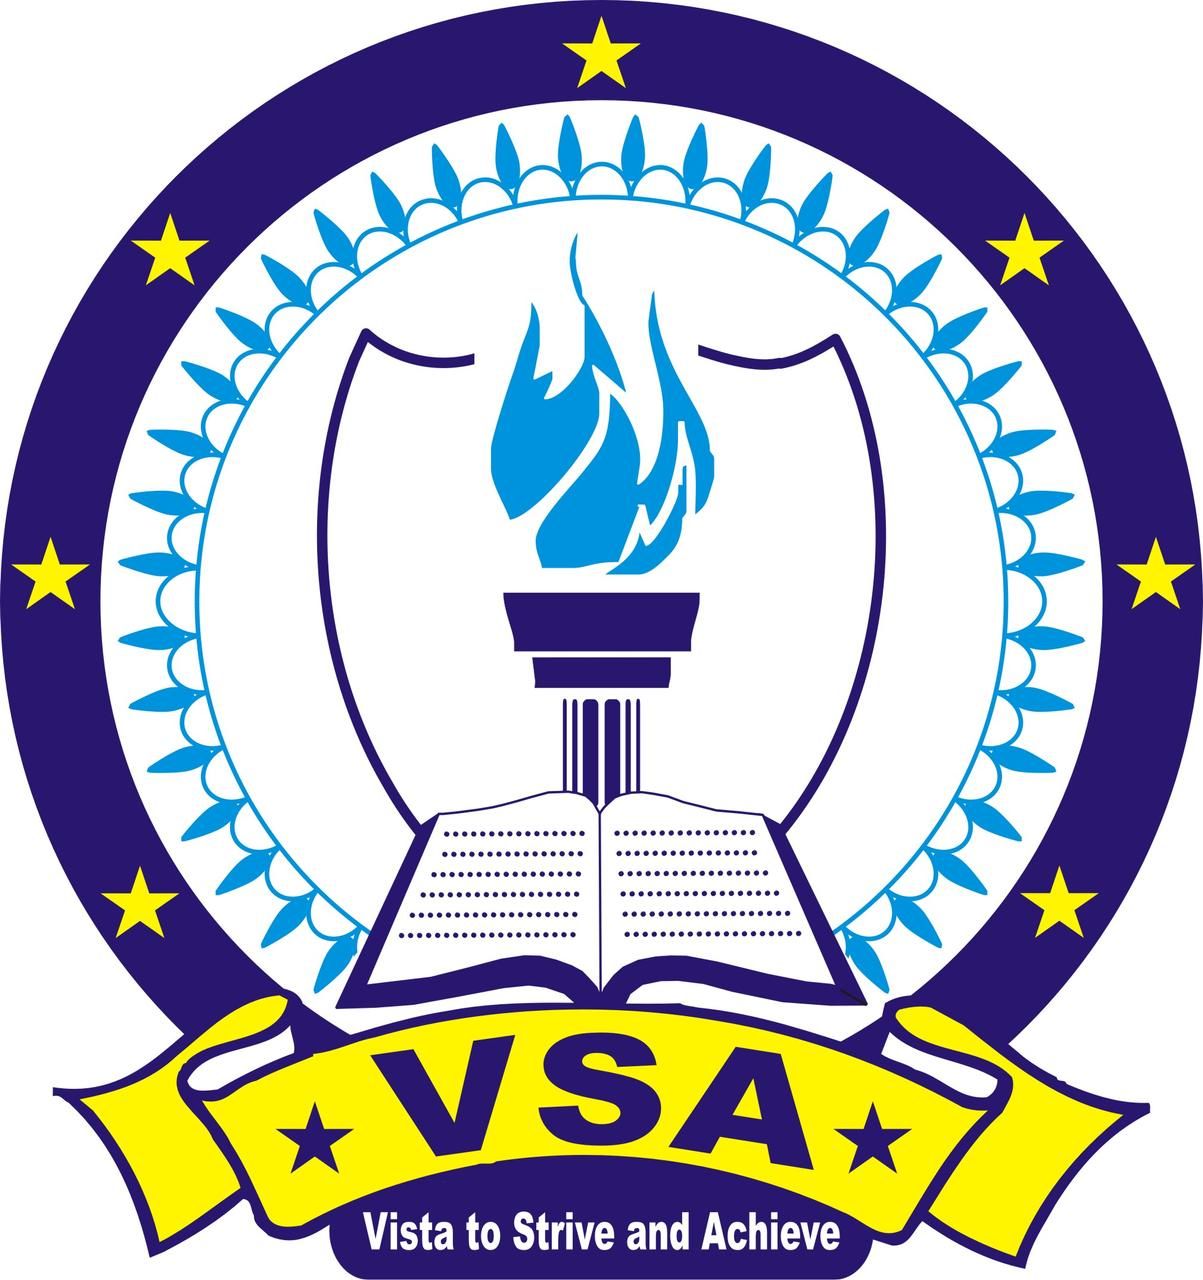 VSA Groups of Institutions